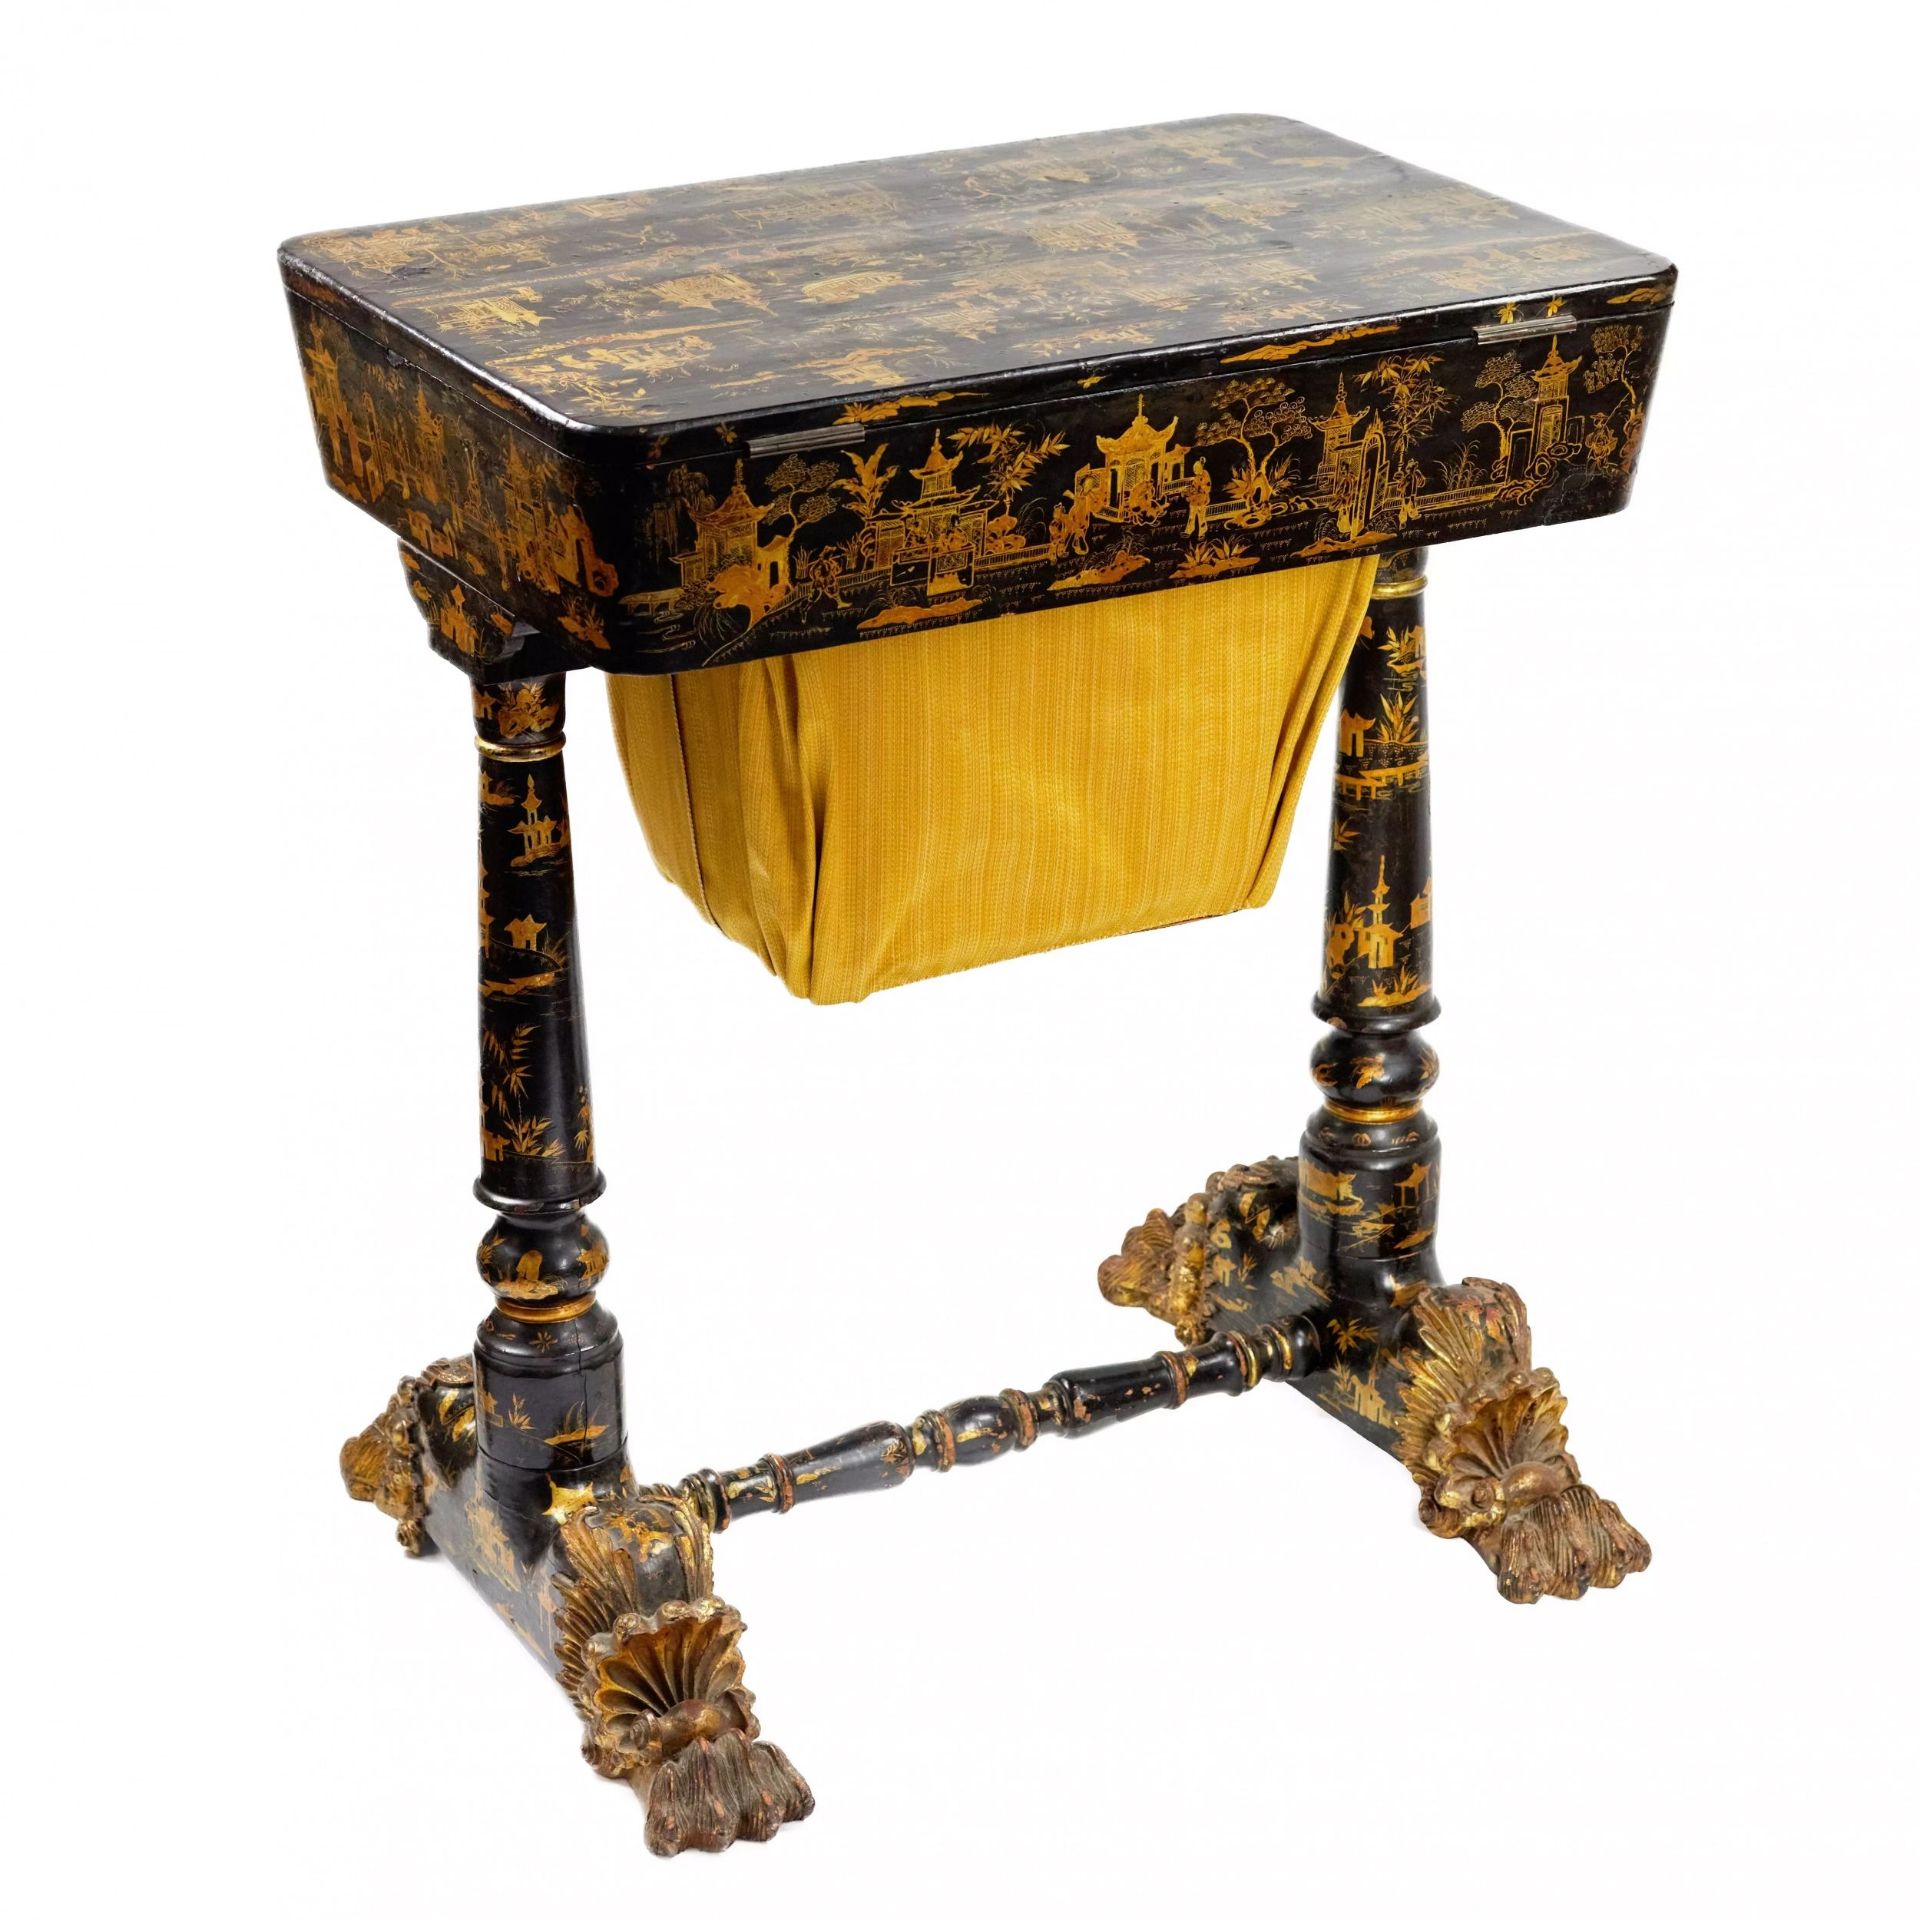 Needlework table made of black and gold Beijing lacquer. 19th century. - Image 3 of 11